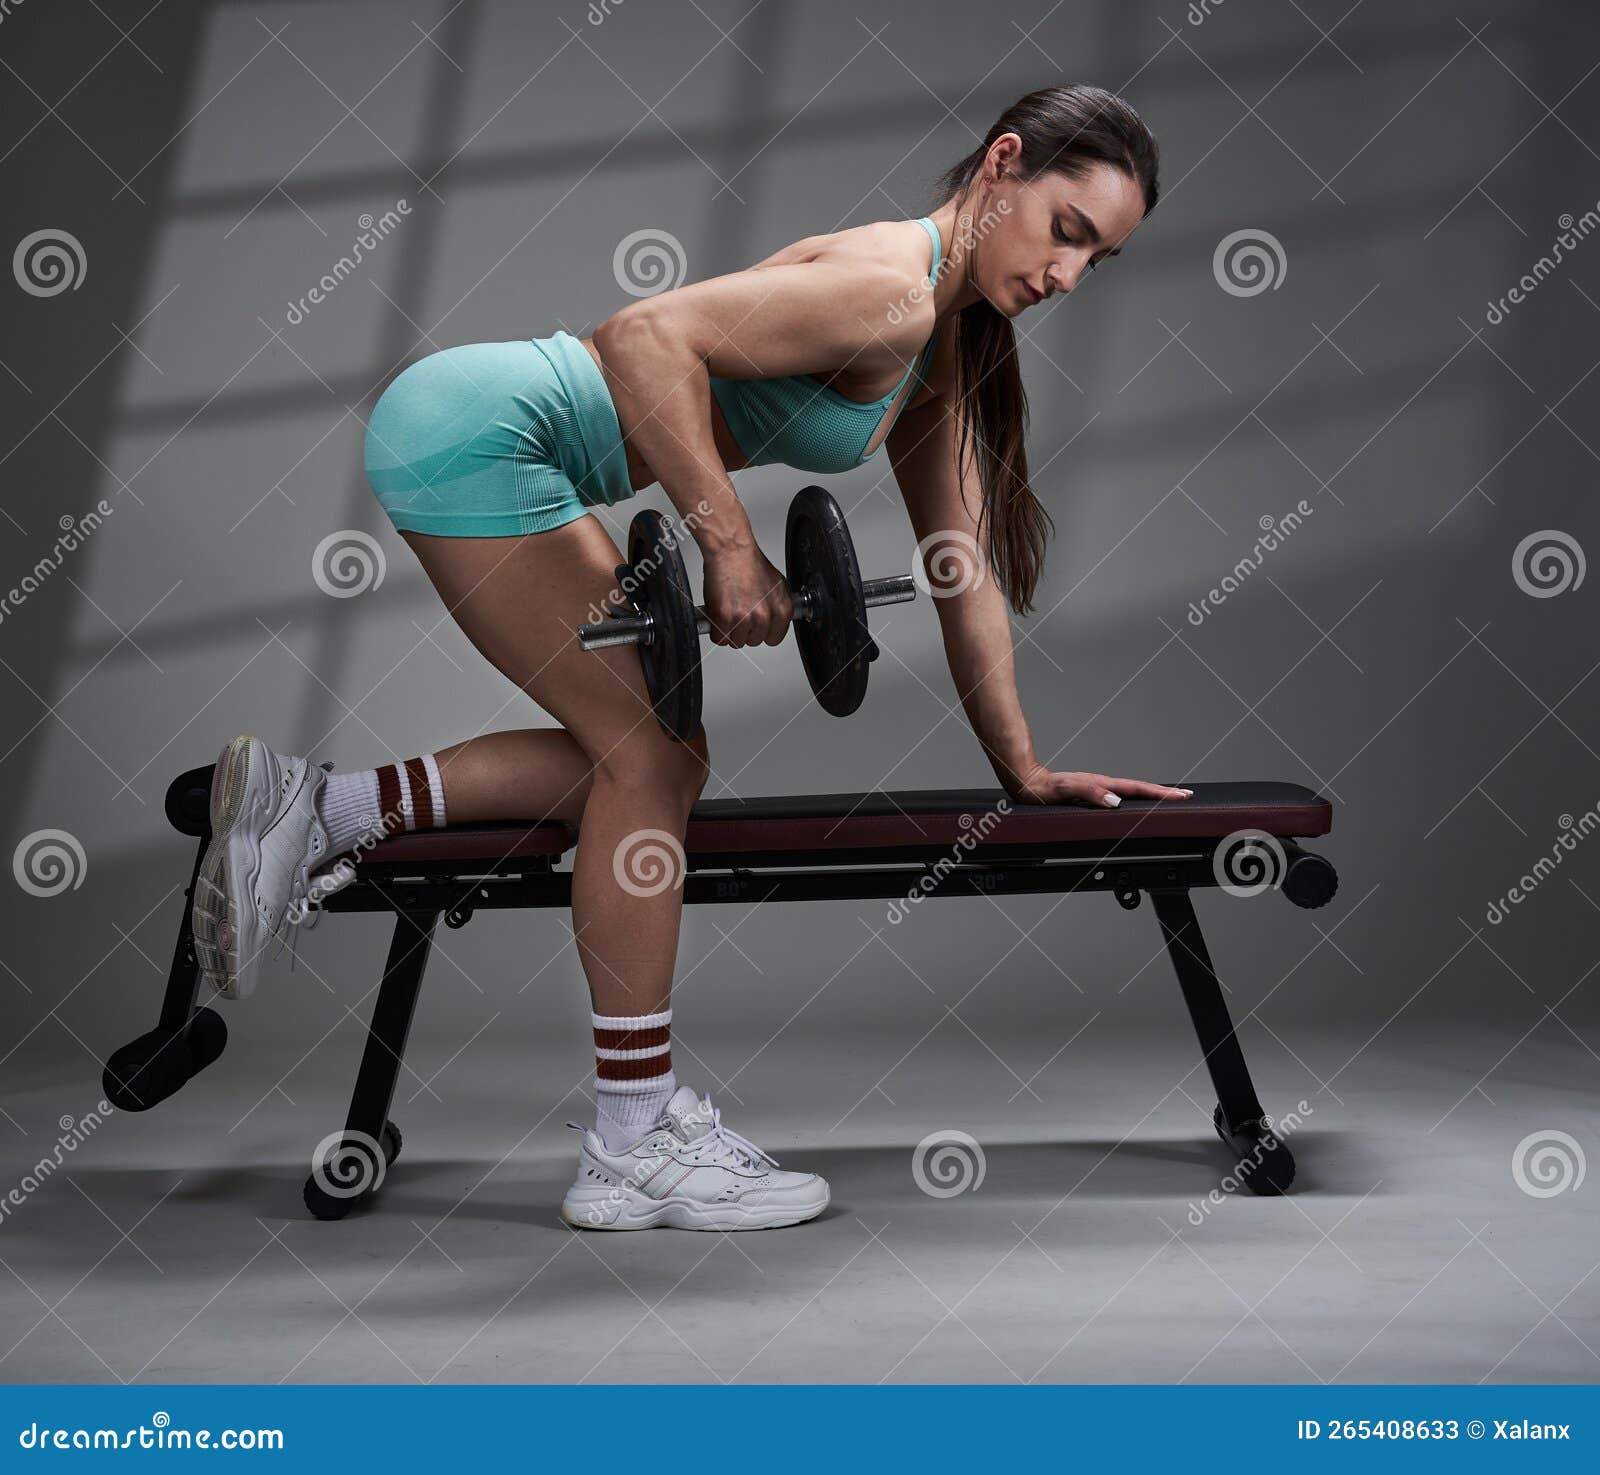 Premium Vector  Arms dumbbell row exercise, young female athlete doing  fitness exercise, fitness at home.